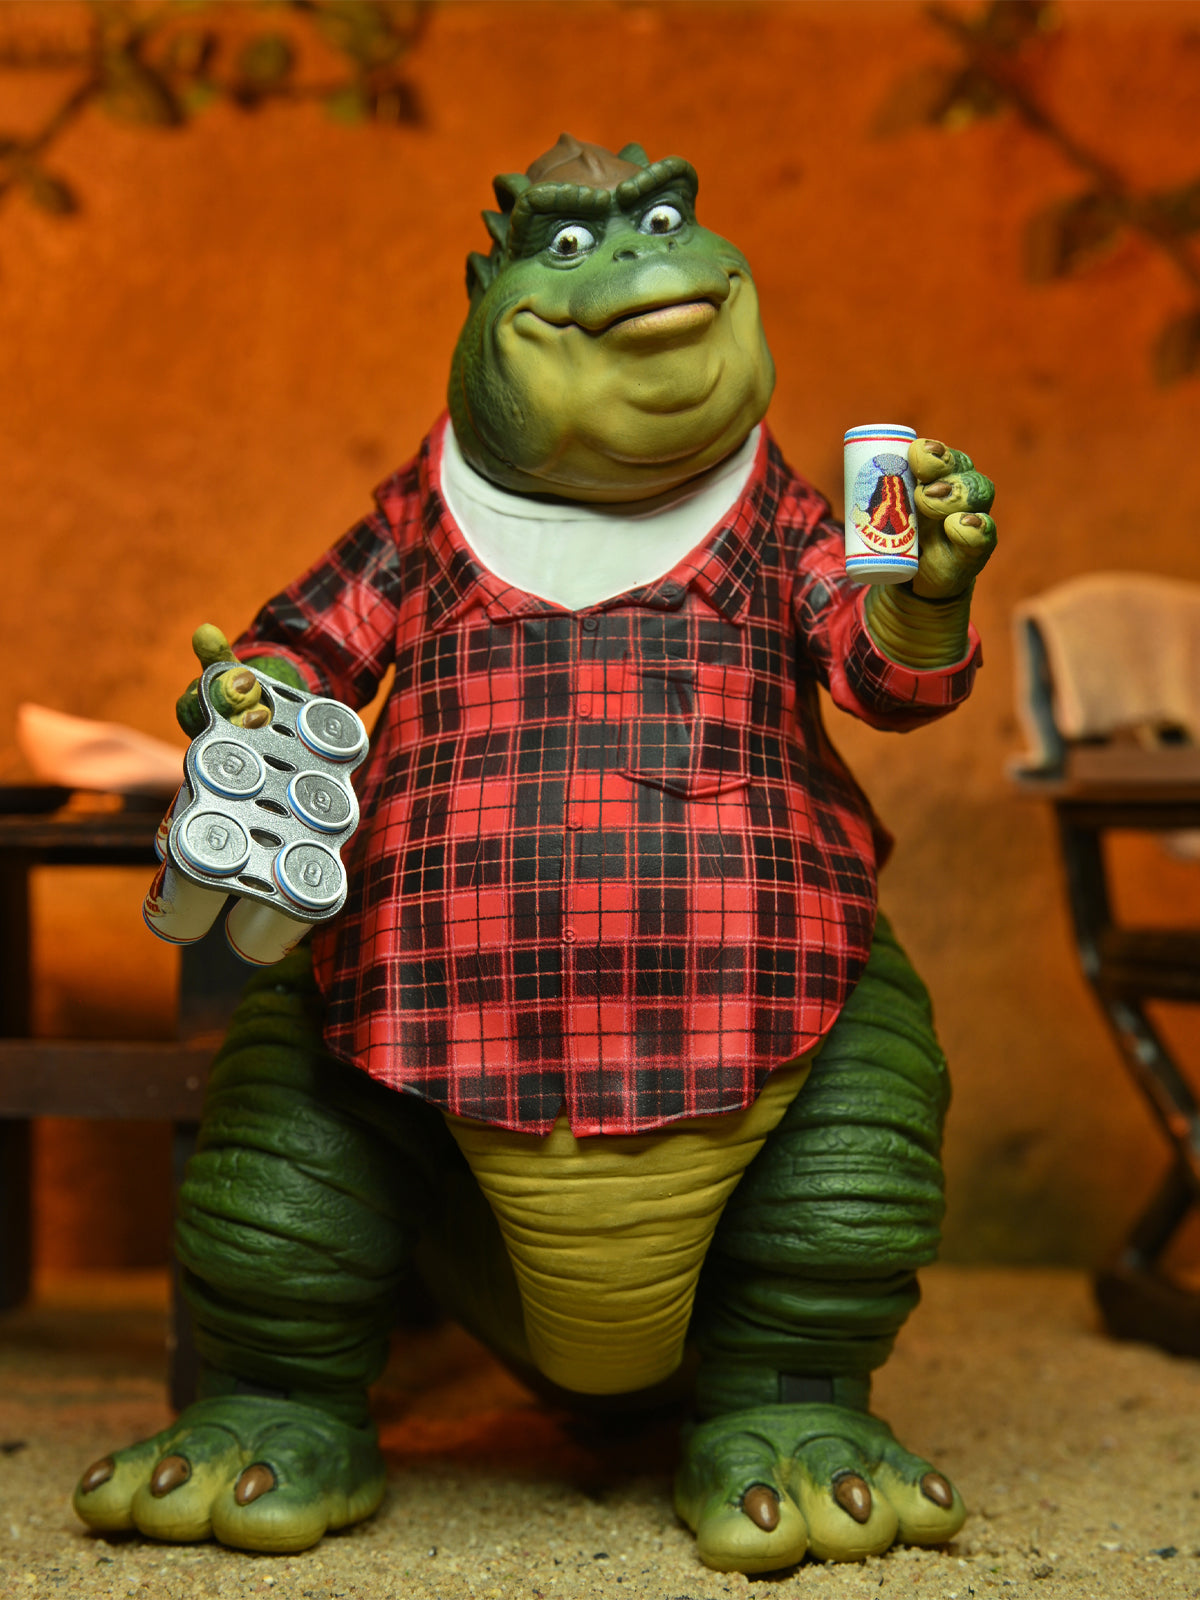 BUY NOW - DINOSAURS - ULTIMATE EARL SINCLAIR 7" SCALE ACTION FIGURE | NECA ONLINE 